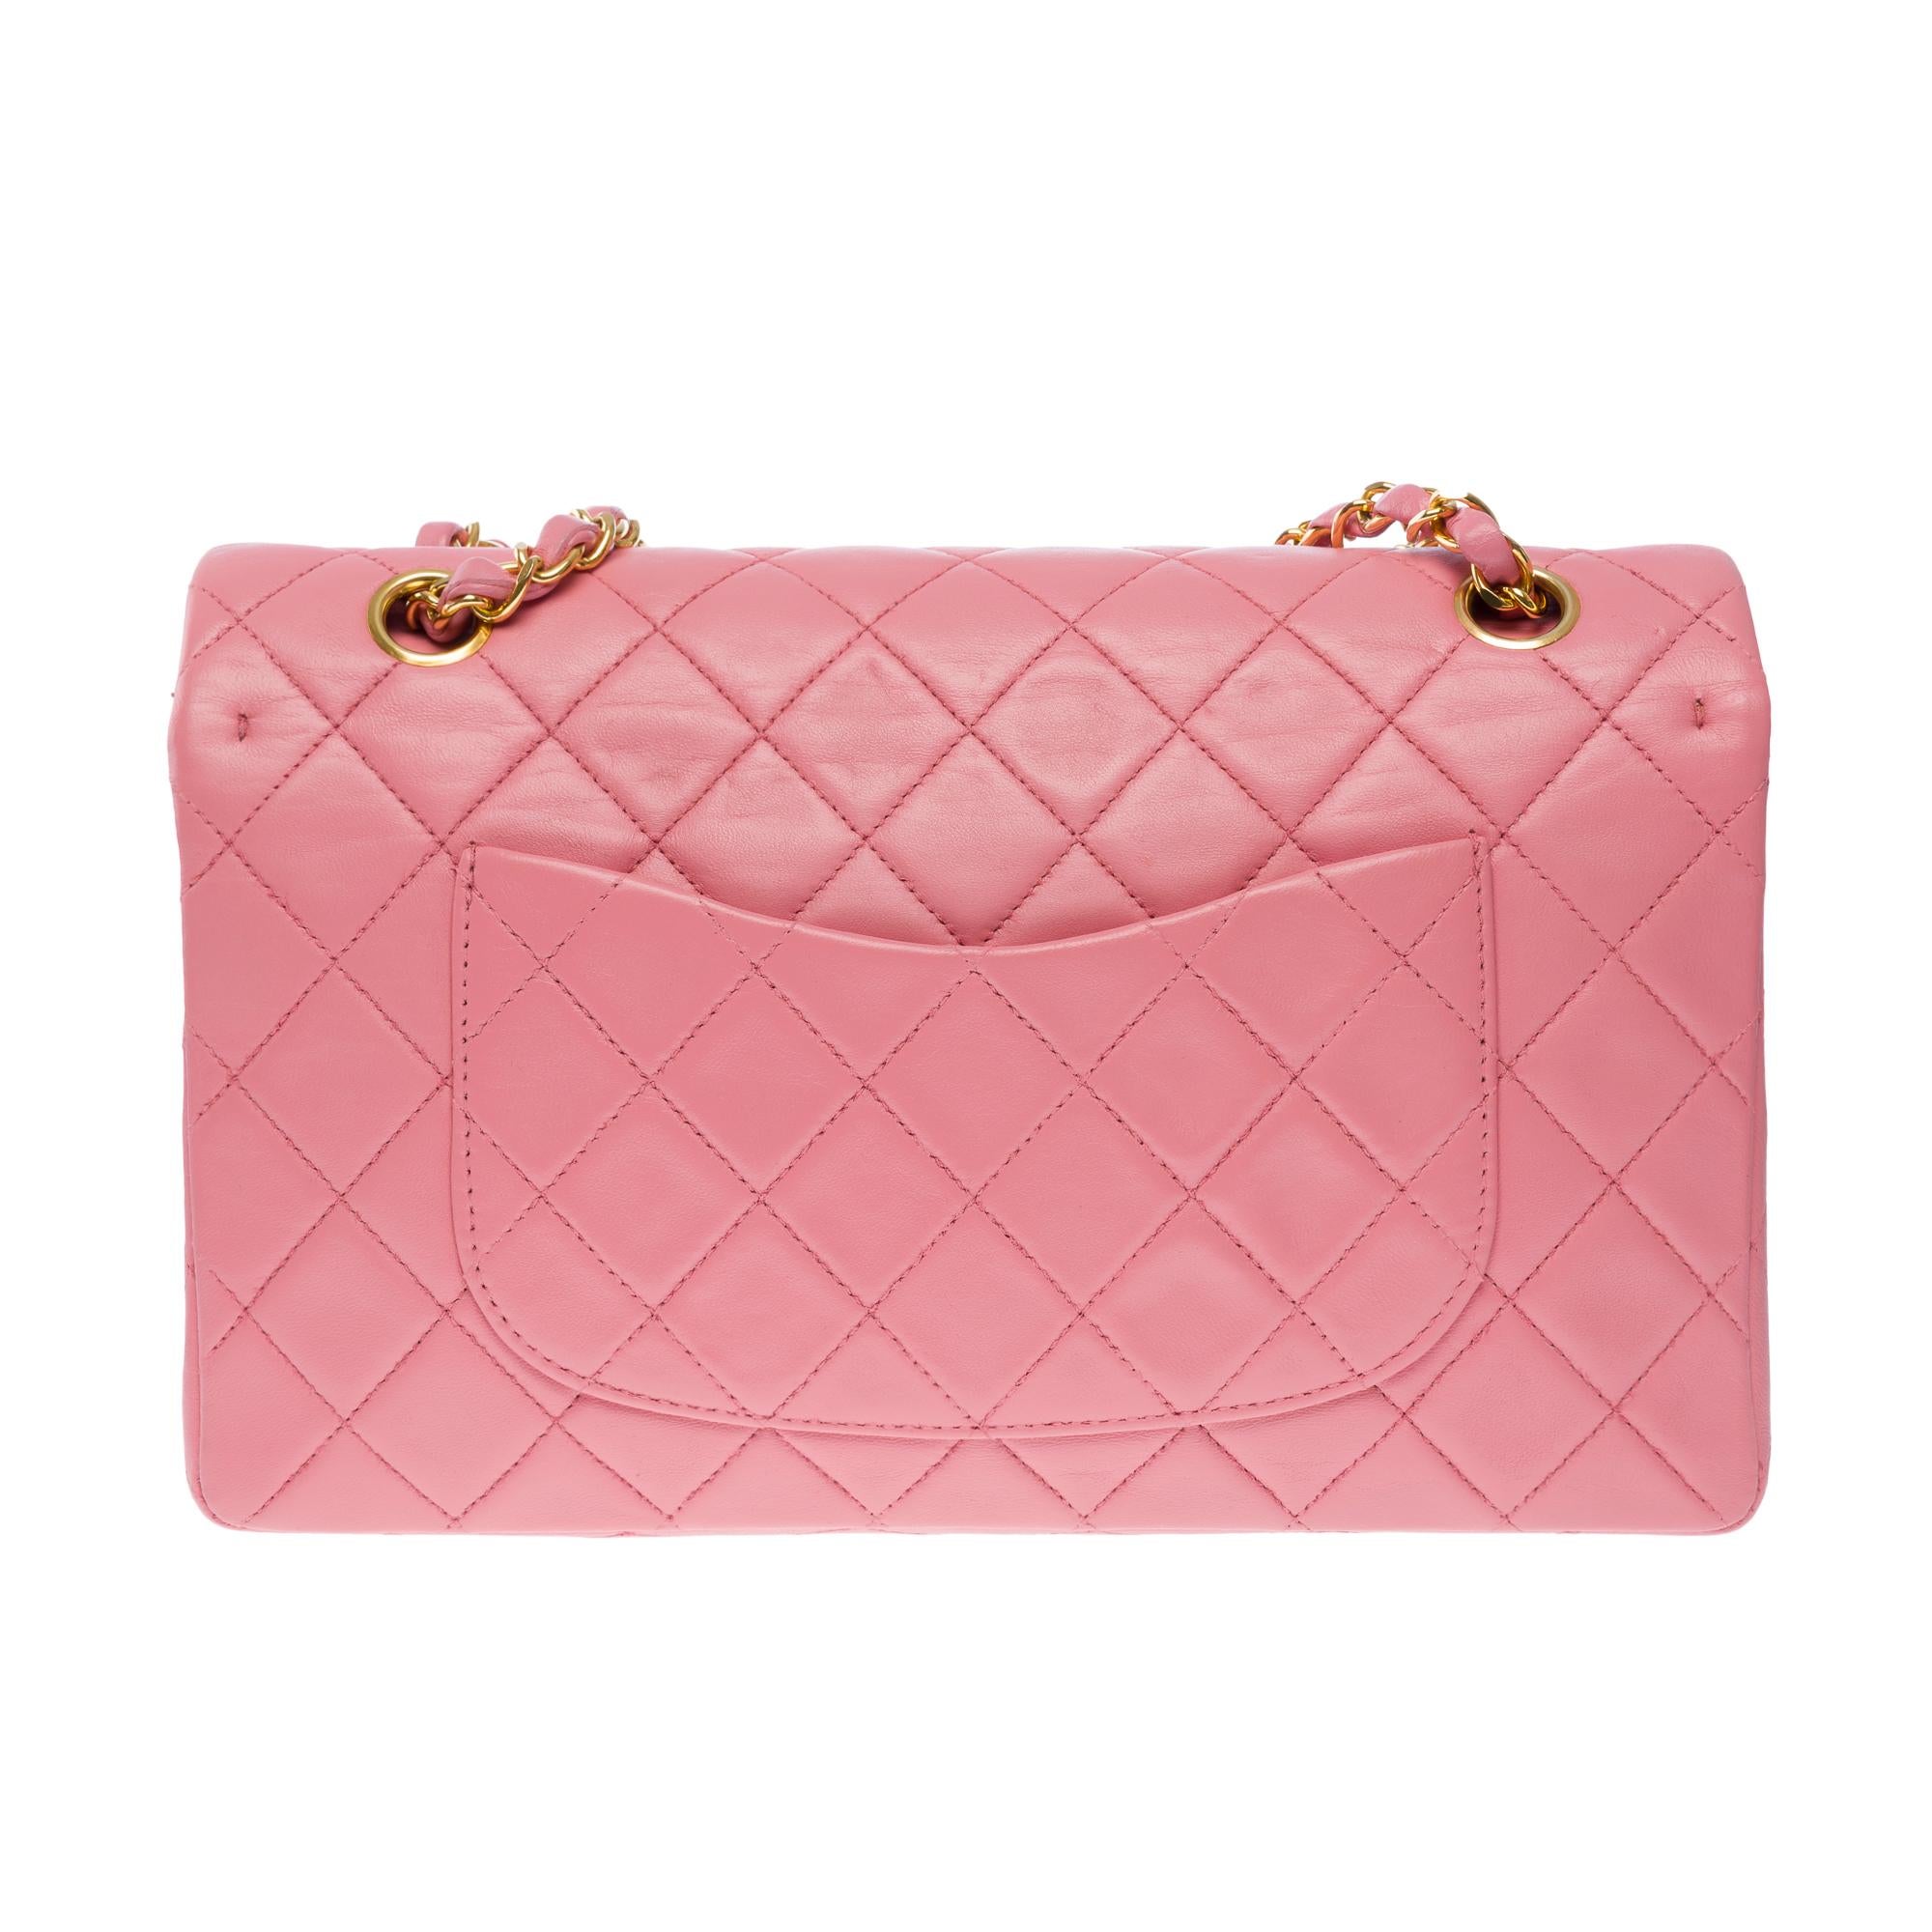 Chanel Timeless Medium double Flap shoulder bag in Pink quilted lambskin, GHW 1